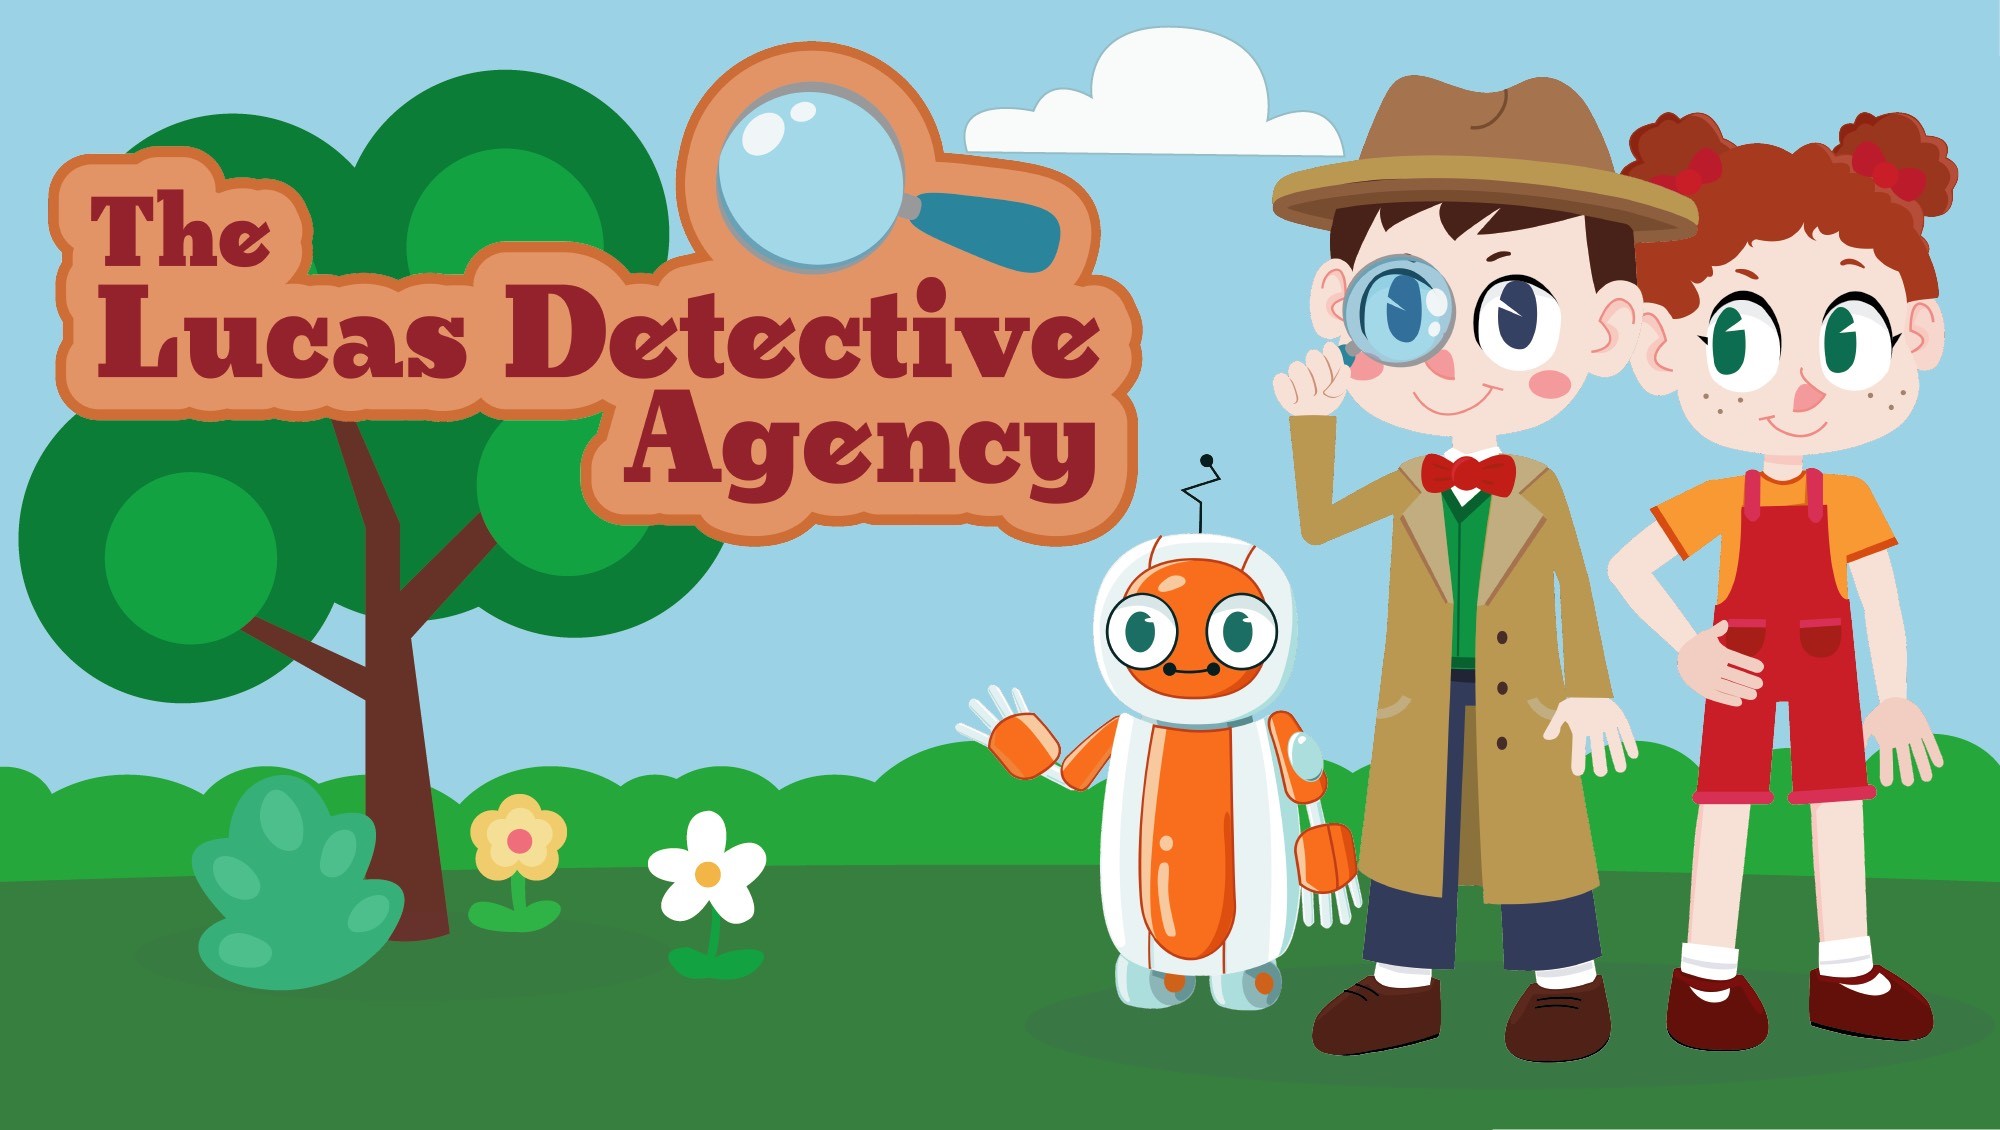 The Lucas Detective Agency